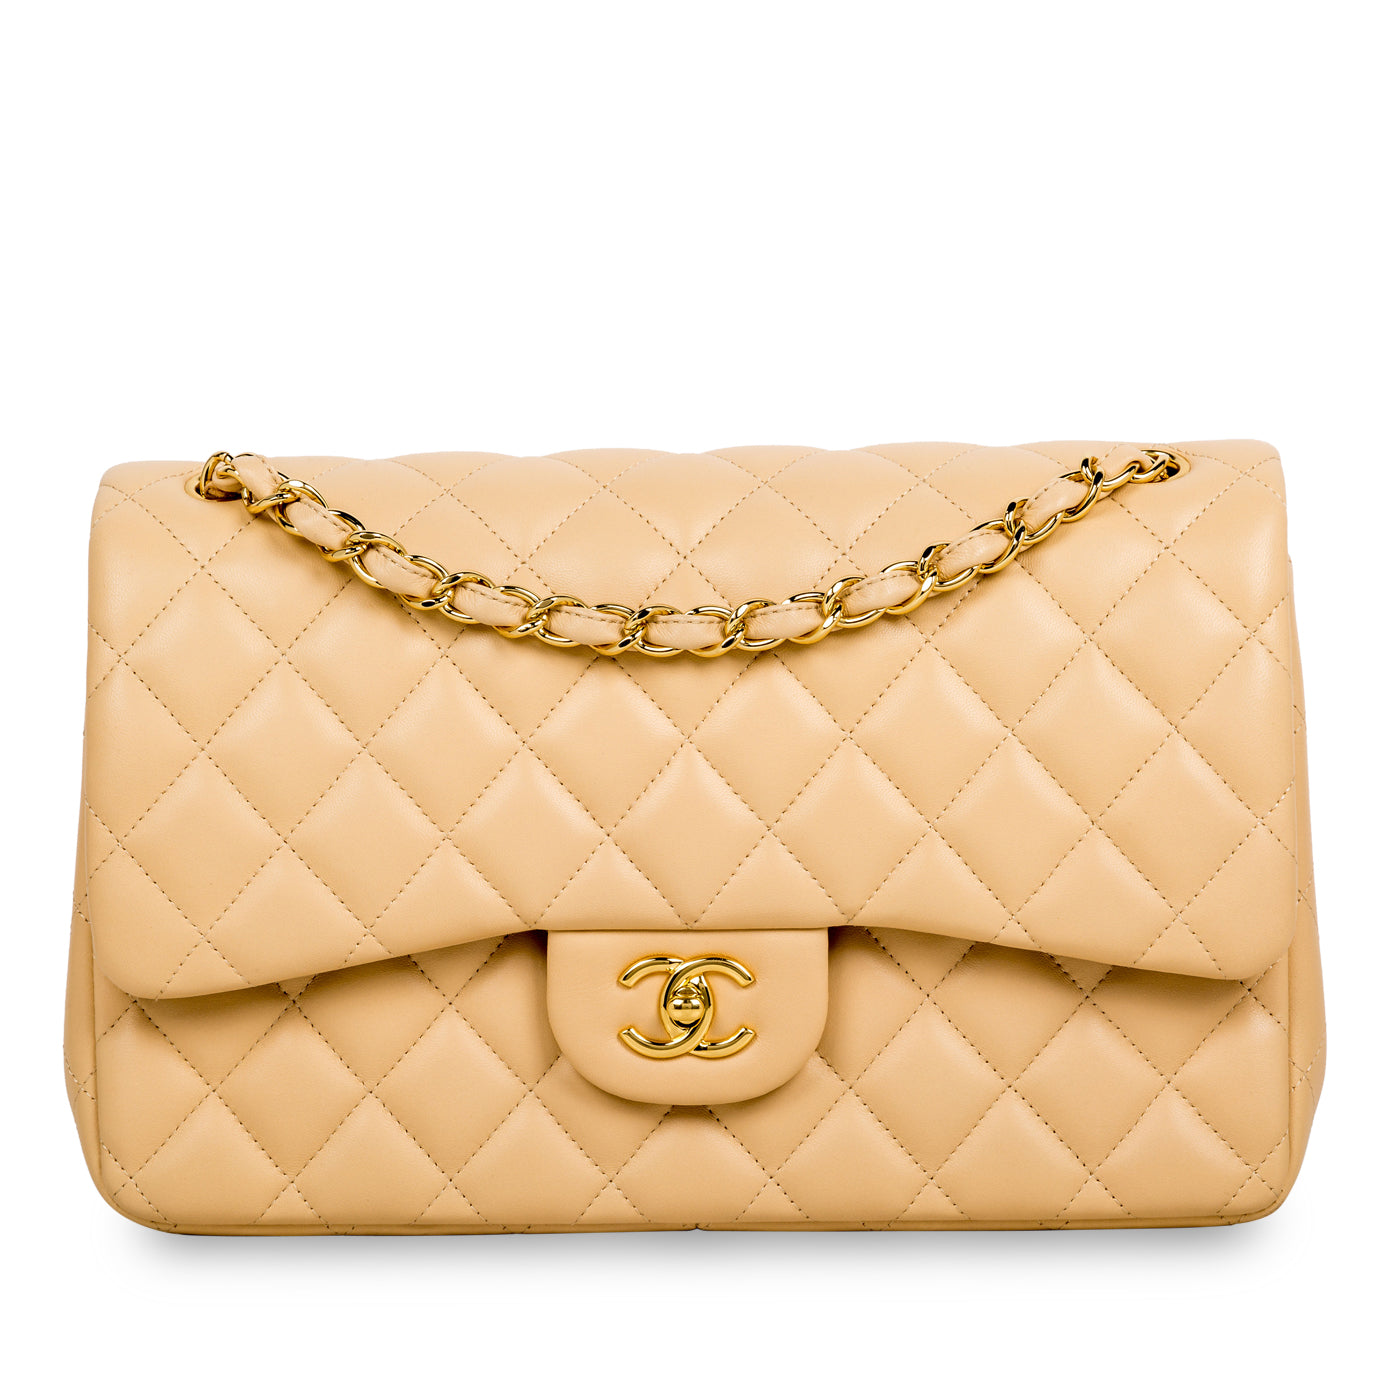 Chanel 2.55 vs. Classic Flap: Everything You Need To Know